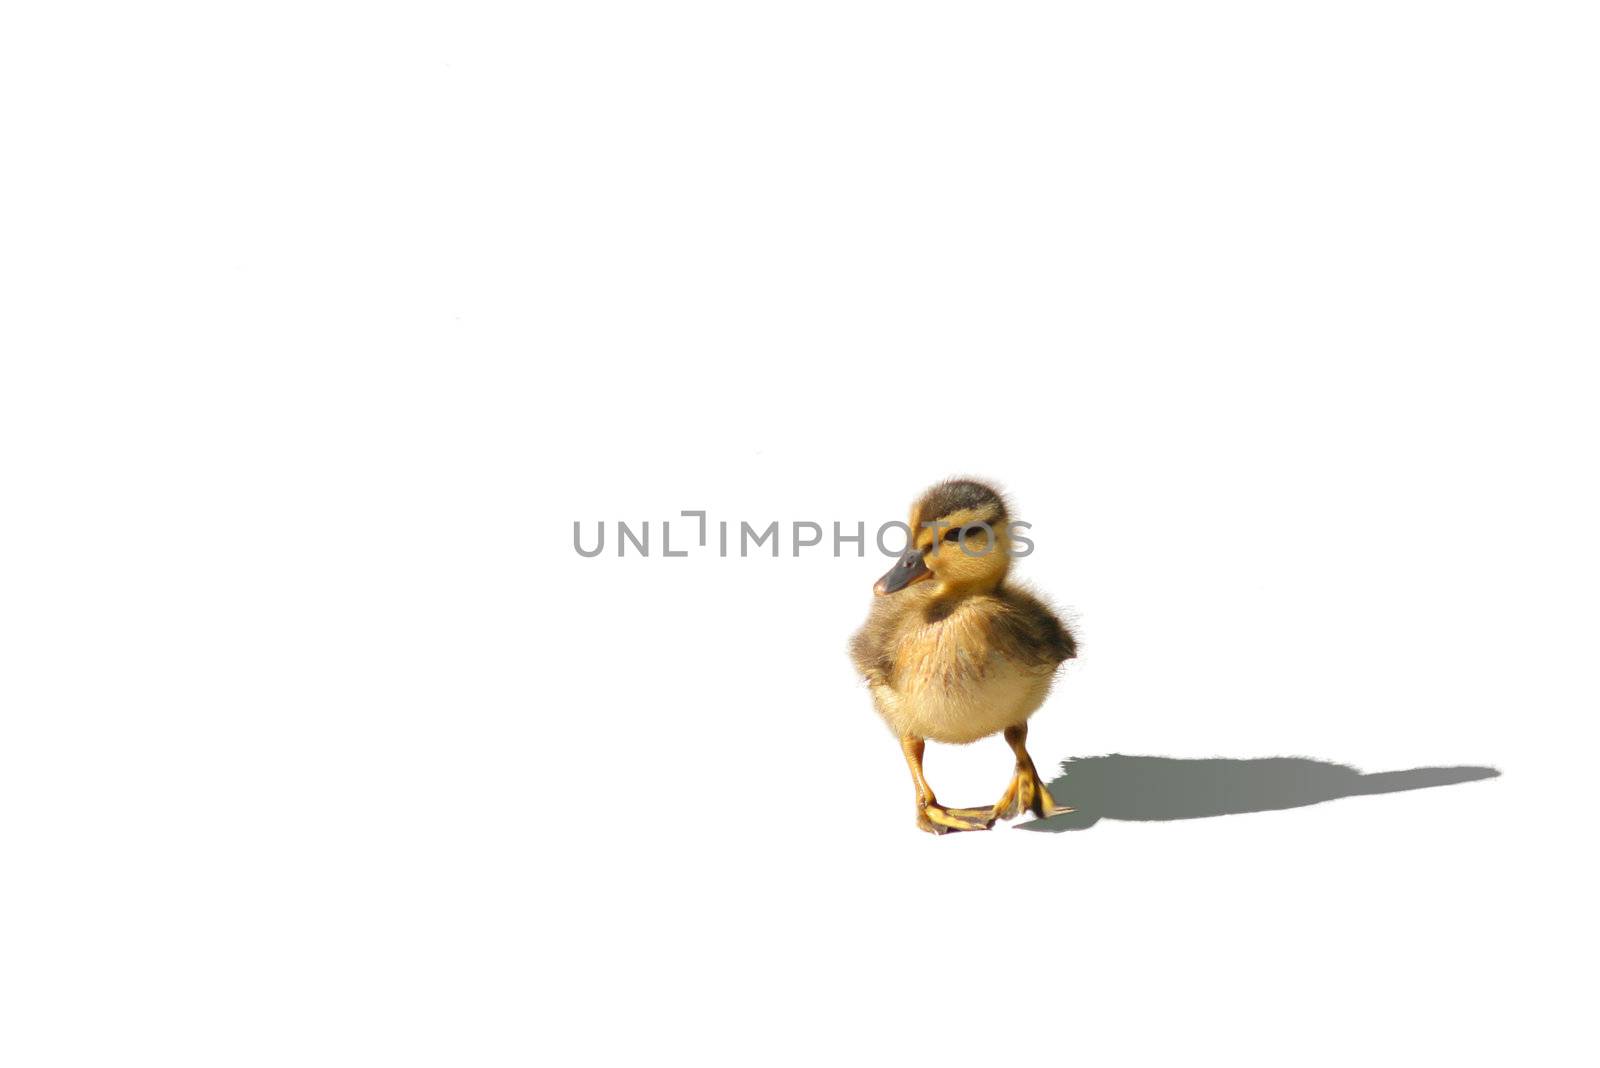 The little duck alone on an isolated background.